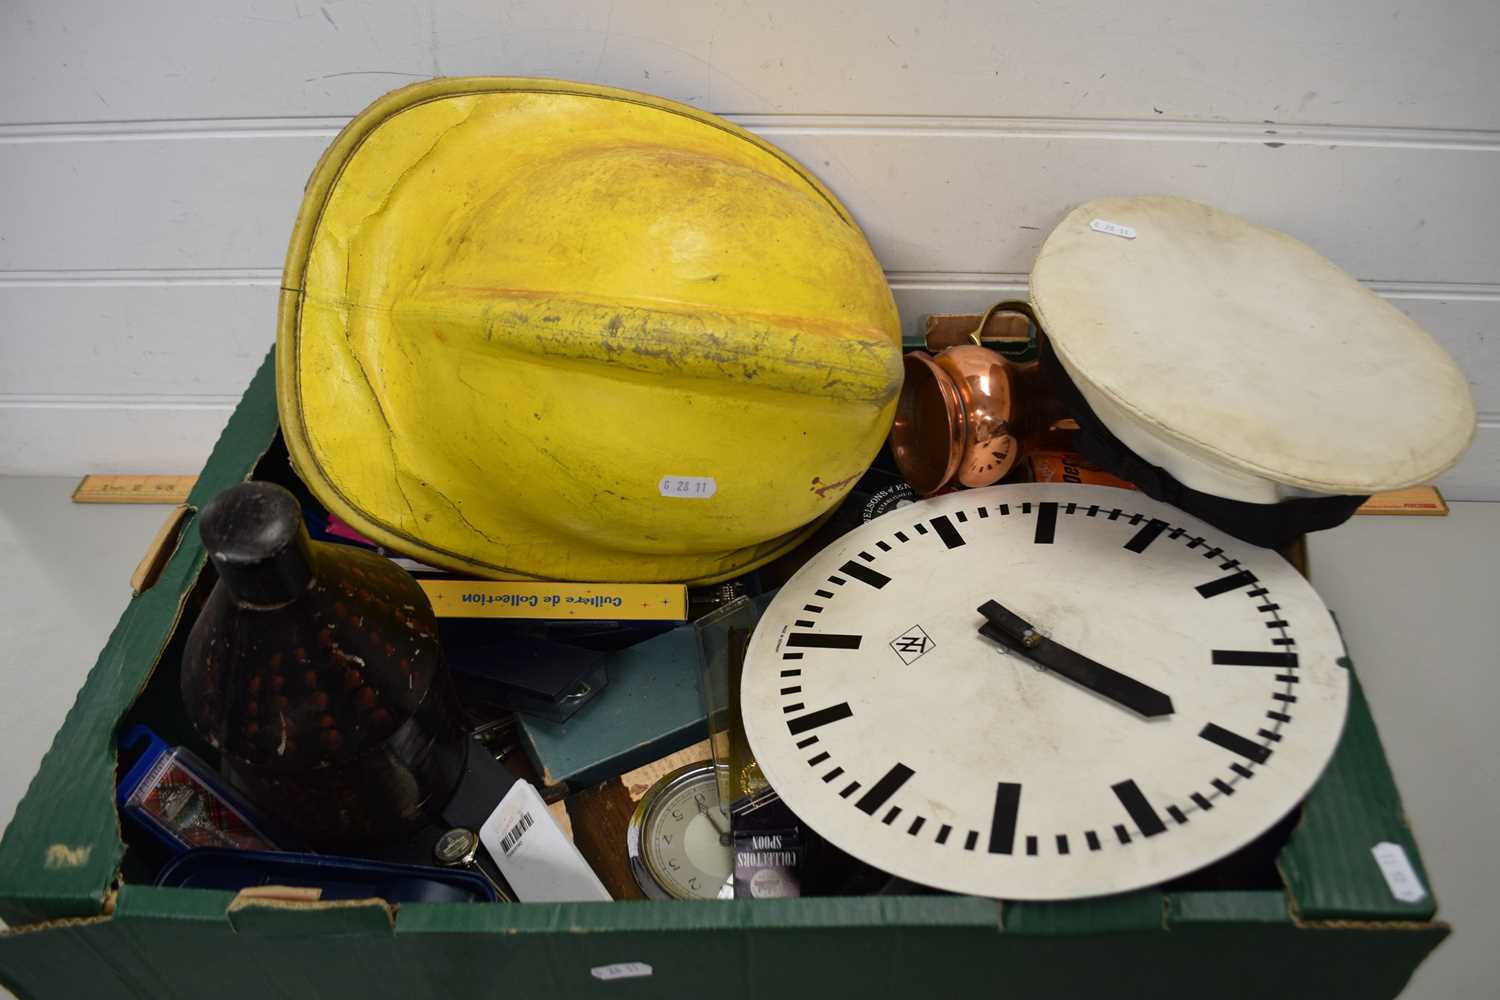 FIREMAN'S HELMET, WALL CLOCK, VARIOUS COLLECTORS SPOONS, NAVAL HAT MARKED HMS DOLPHIN AND OTHER